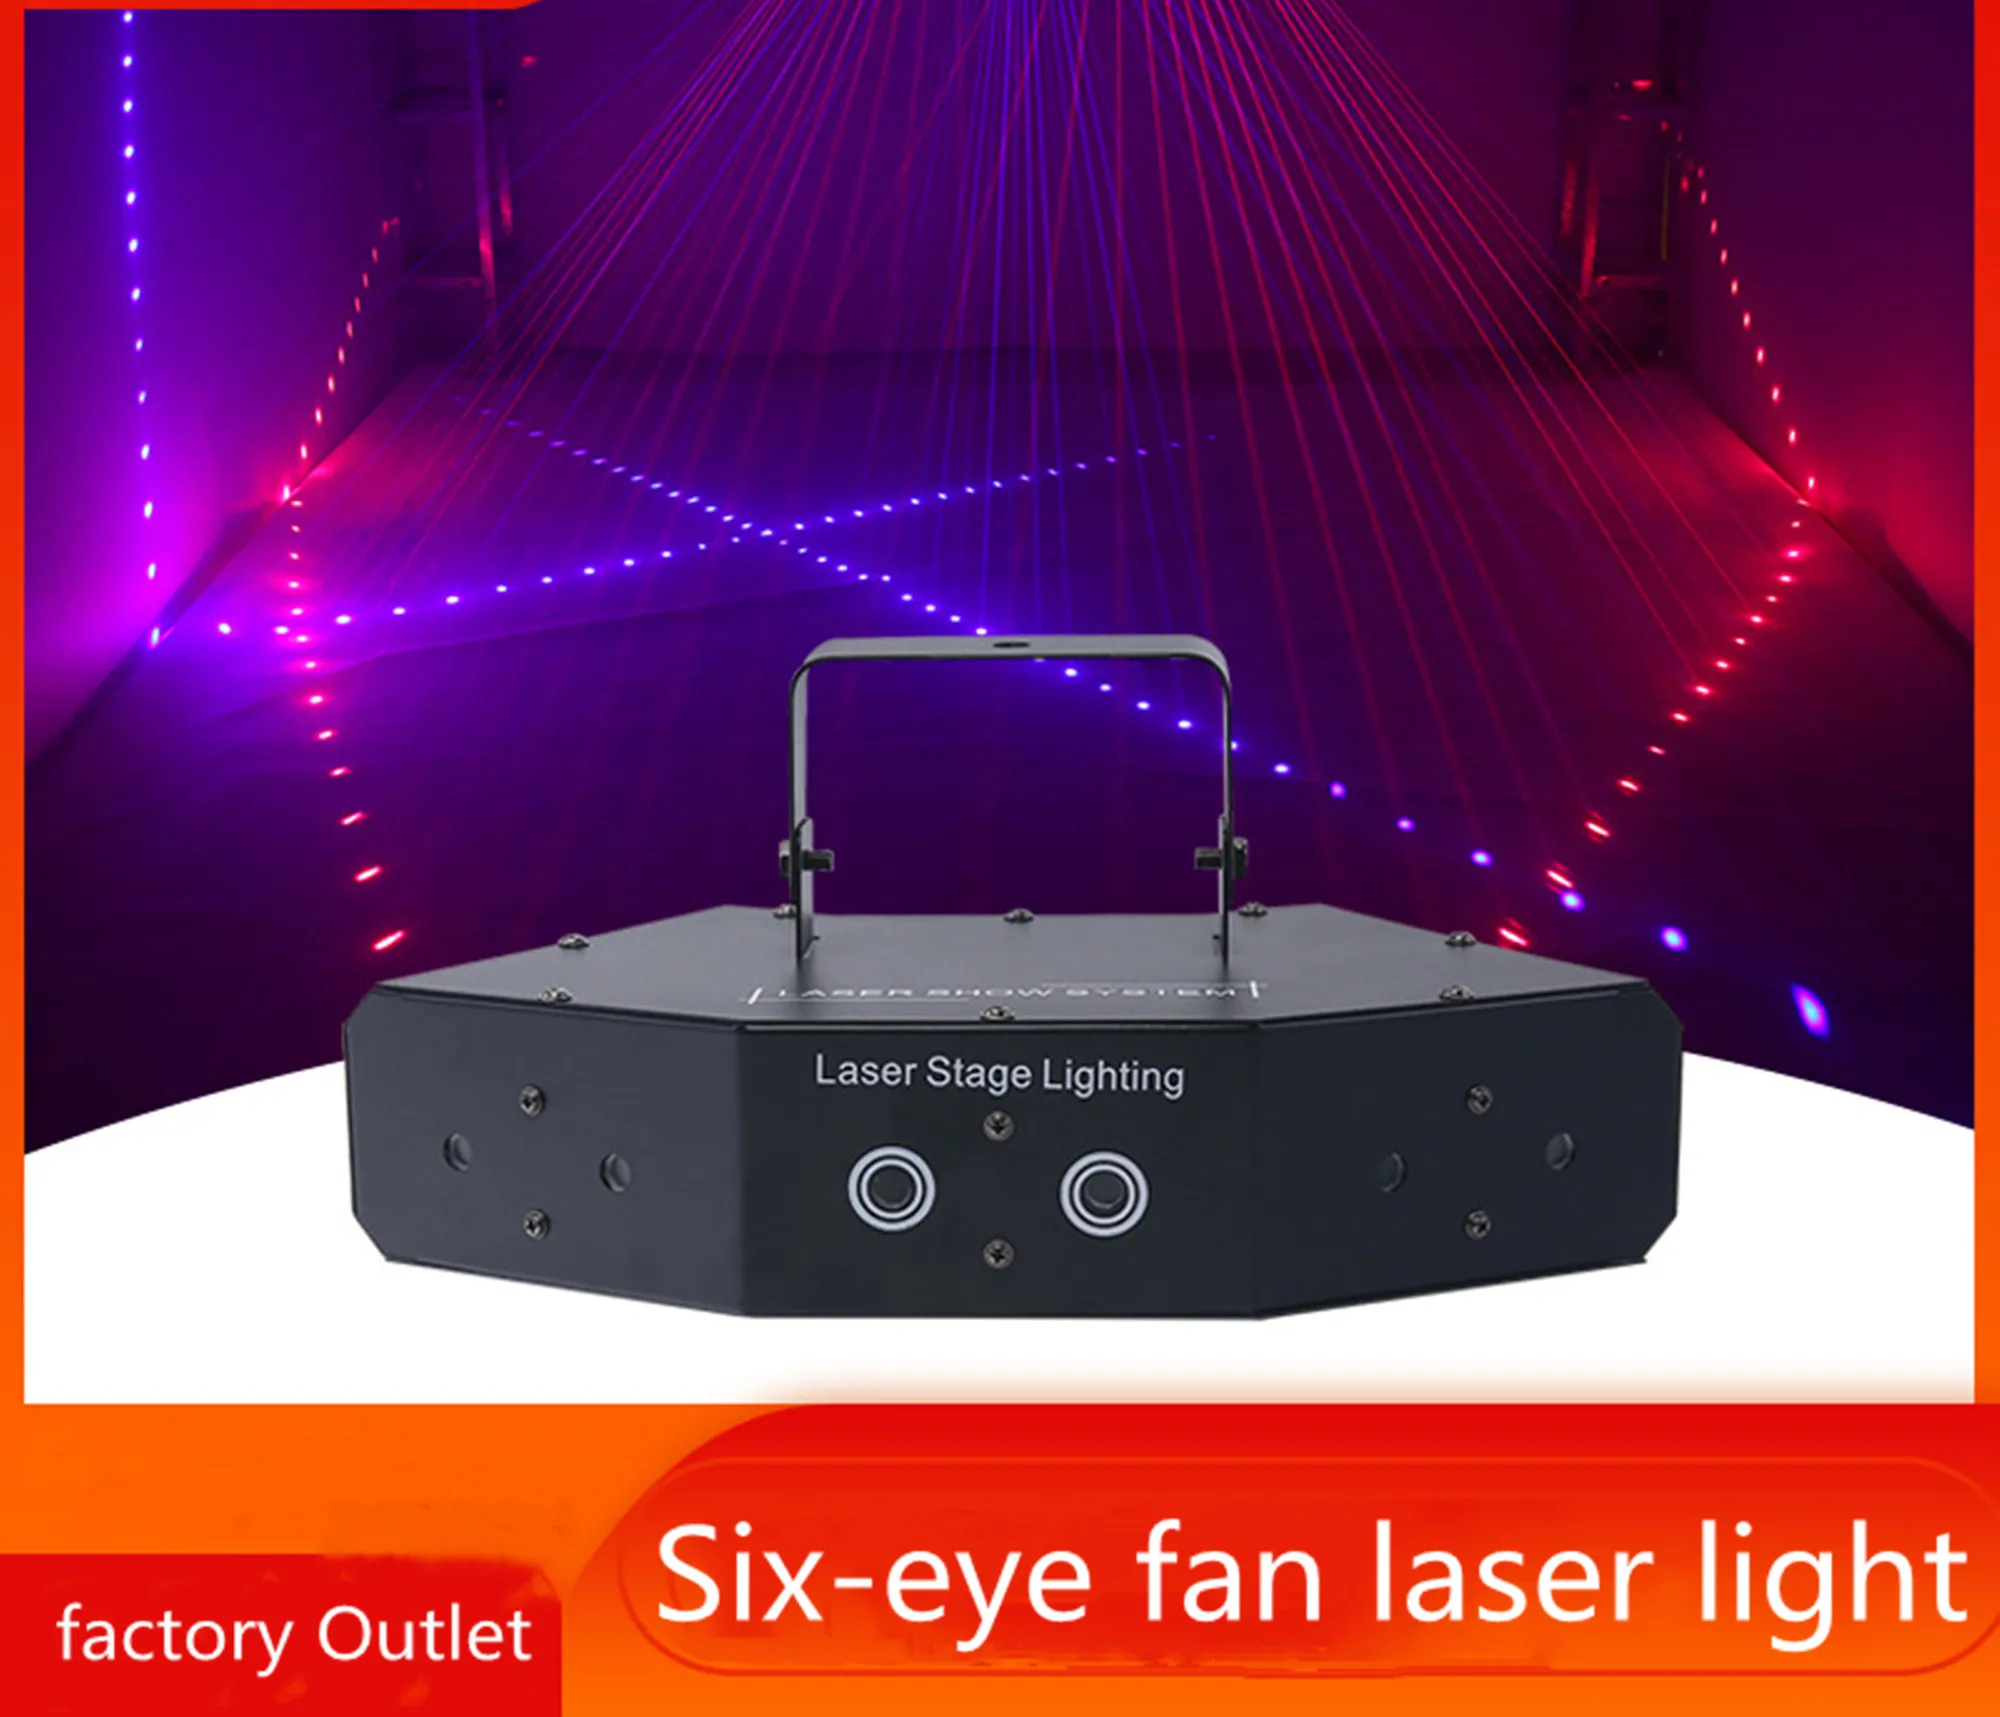 DMX 512 Fan-shaped six-eye scanning RGB Laser Light for DJ Disco Club Stage Event Show Party Effect light with Sound Control